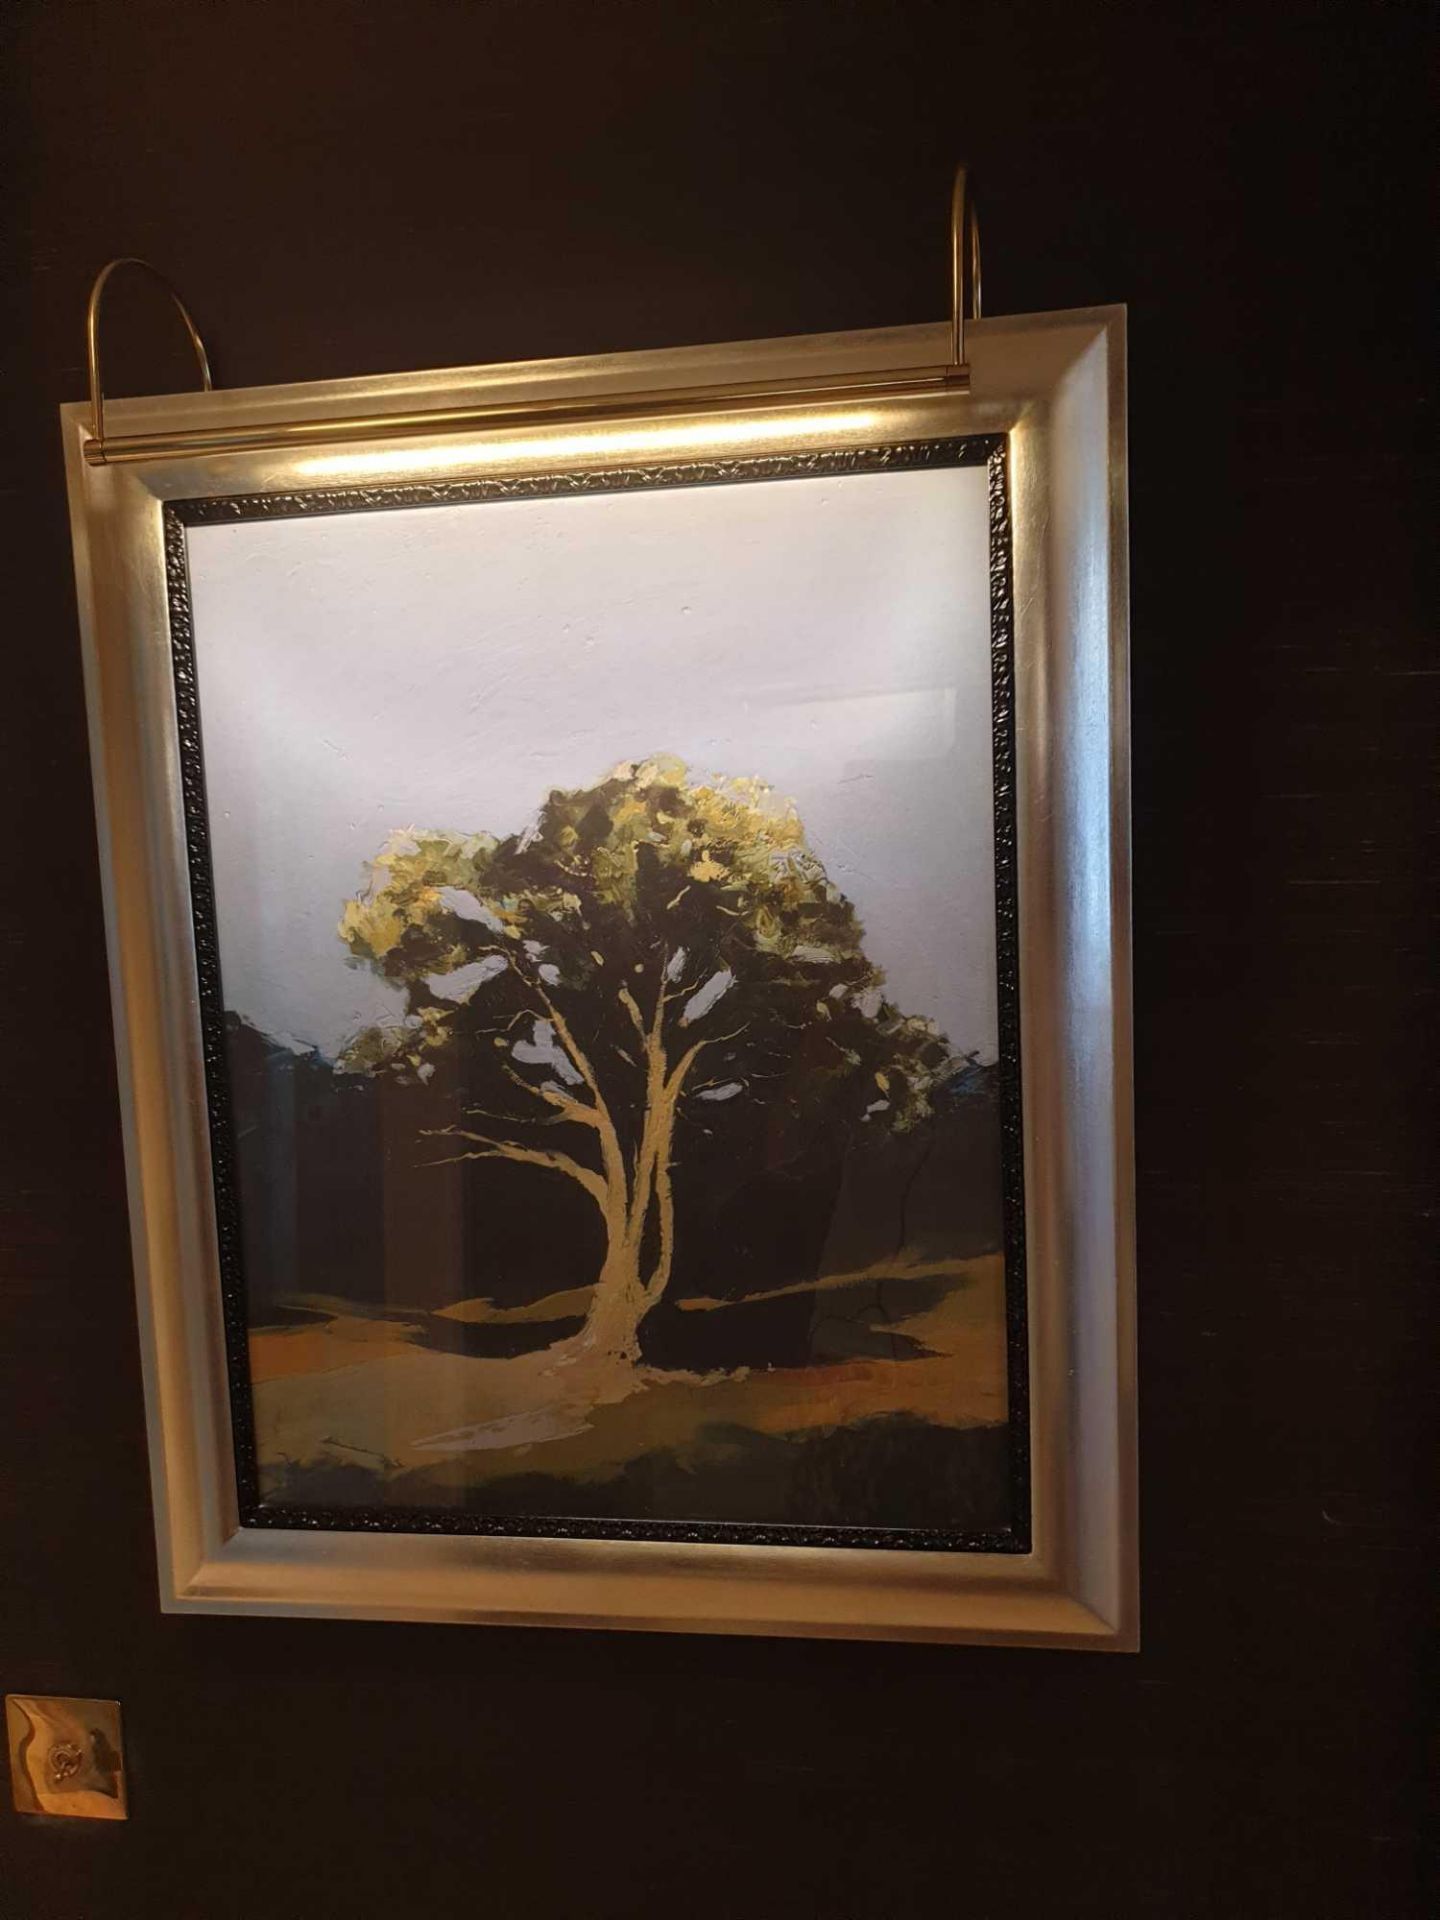 Landscape Lithograph Print Framed Depicting A Tree 62 x 76cm - Image 2 of 2